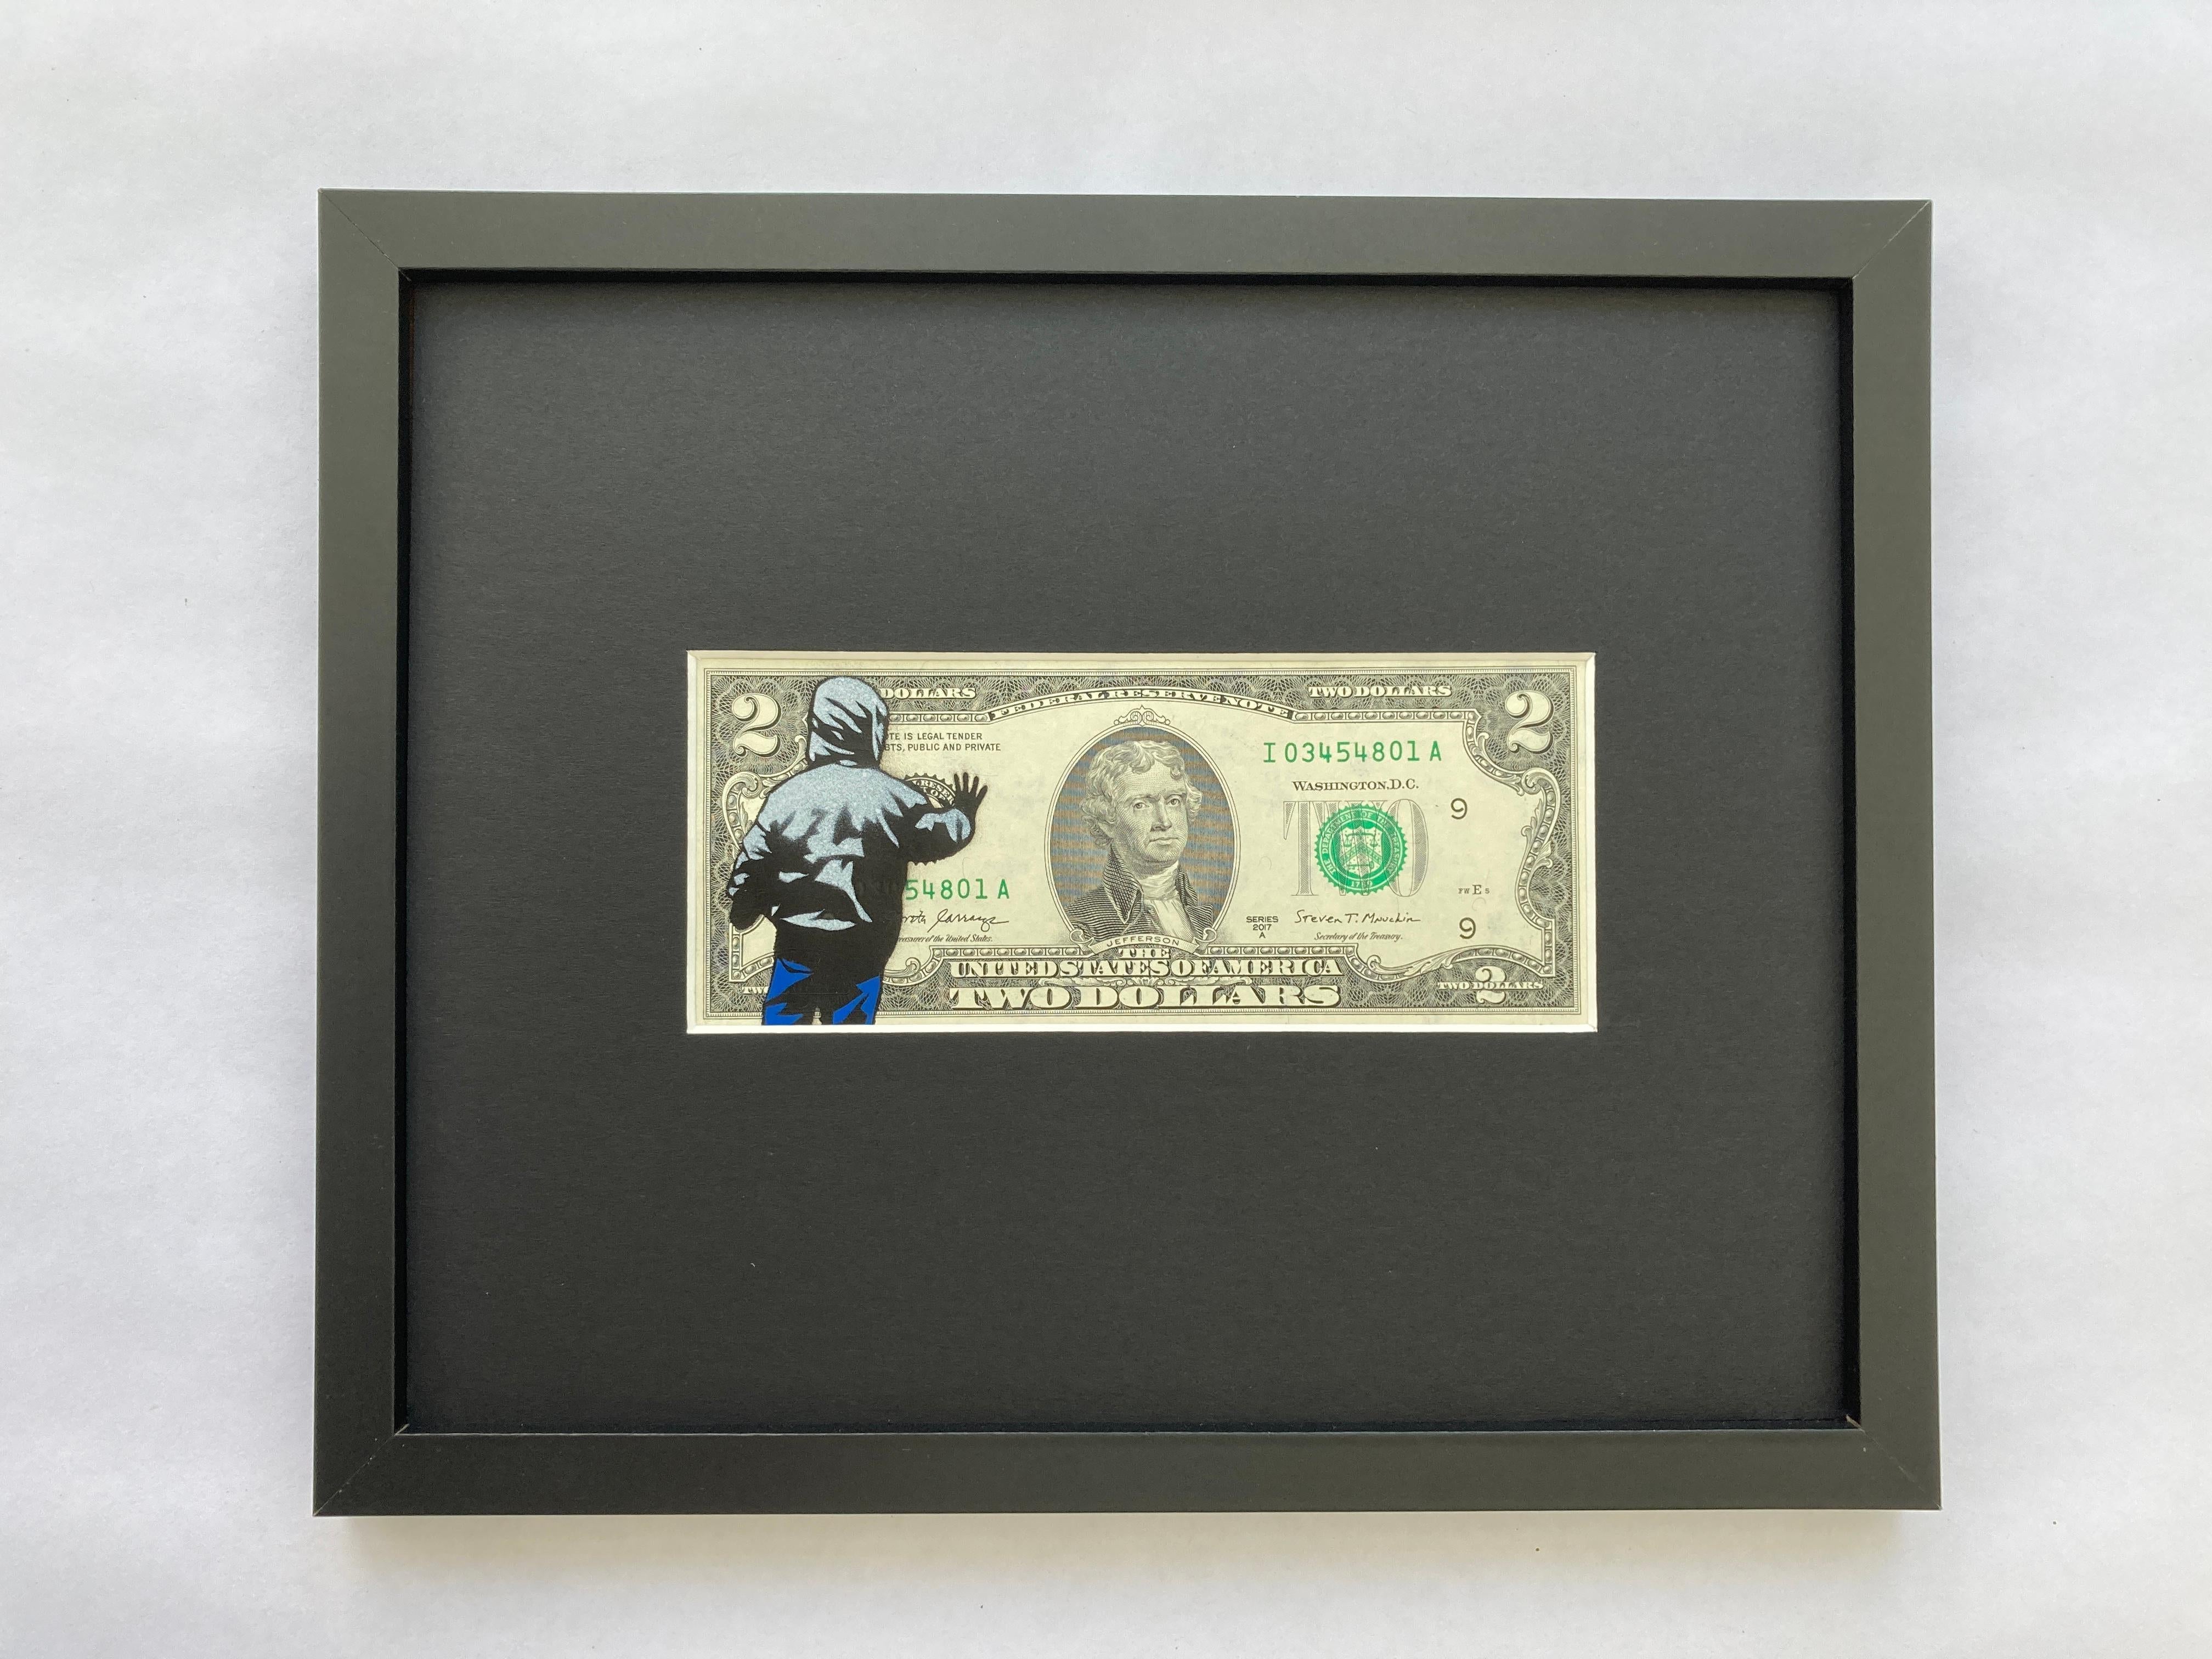 Edition version – white hoodie with blue jeans edition painted onto genuine uncirculated $2 bill with stencil

Handprints painted using UV spray paint are only visible under fluorescent lighting

Surface –uncirculated $2 bill – Comes pre-framed with